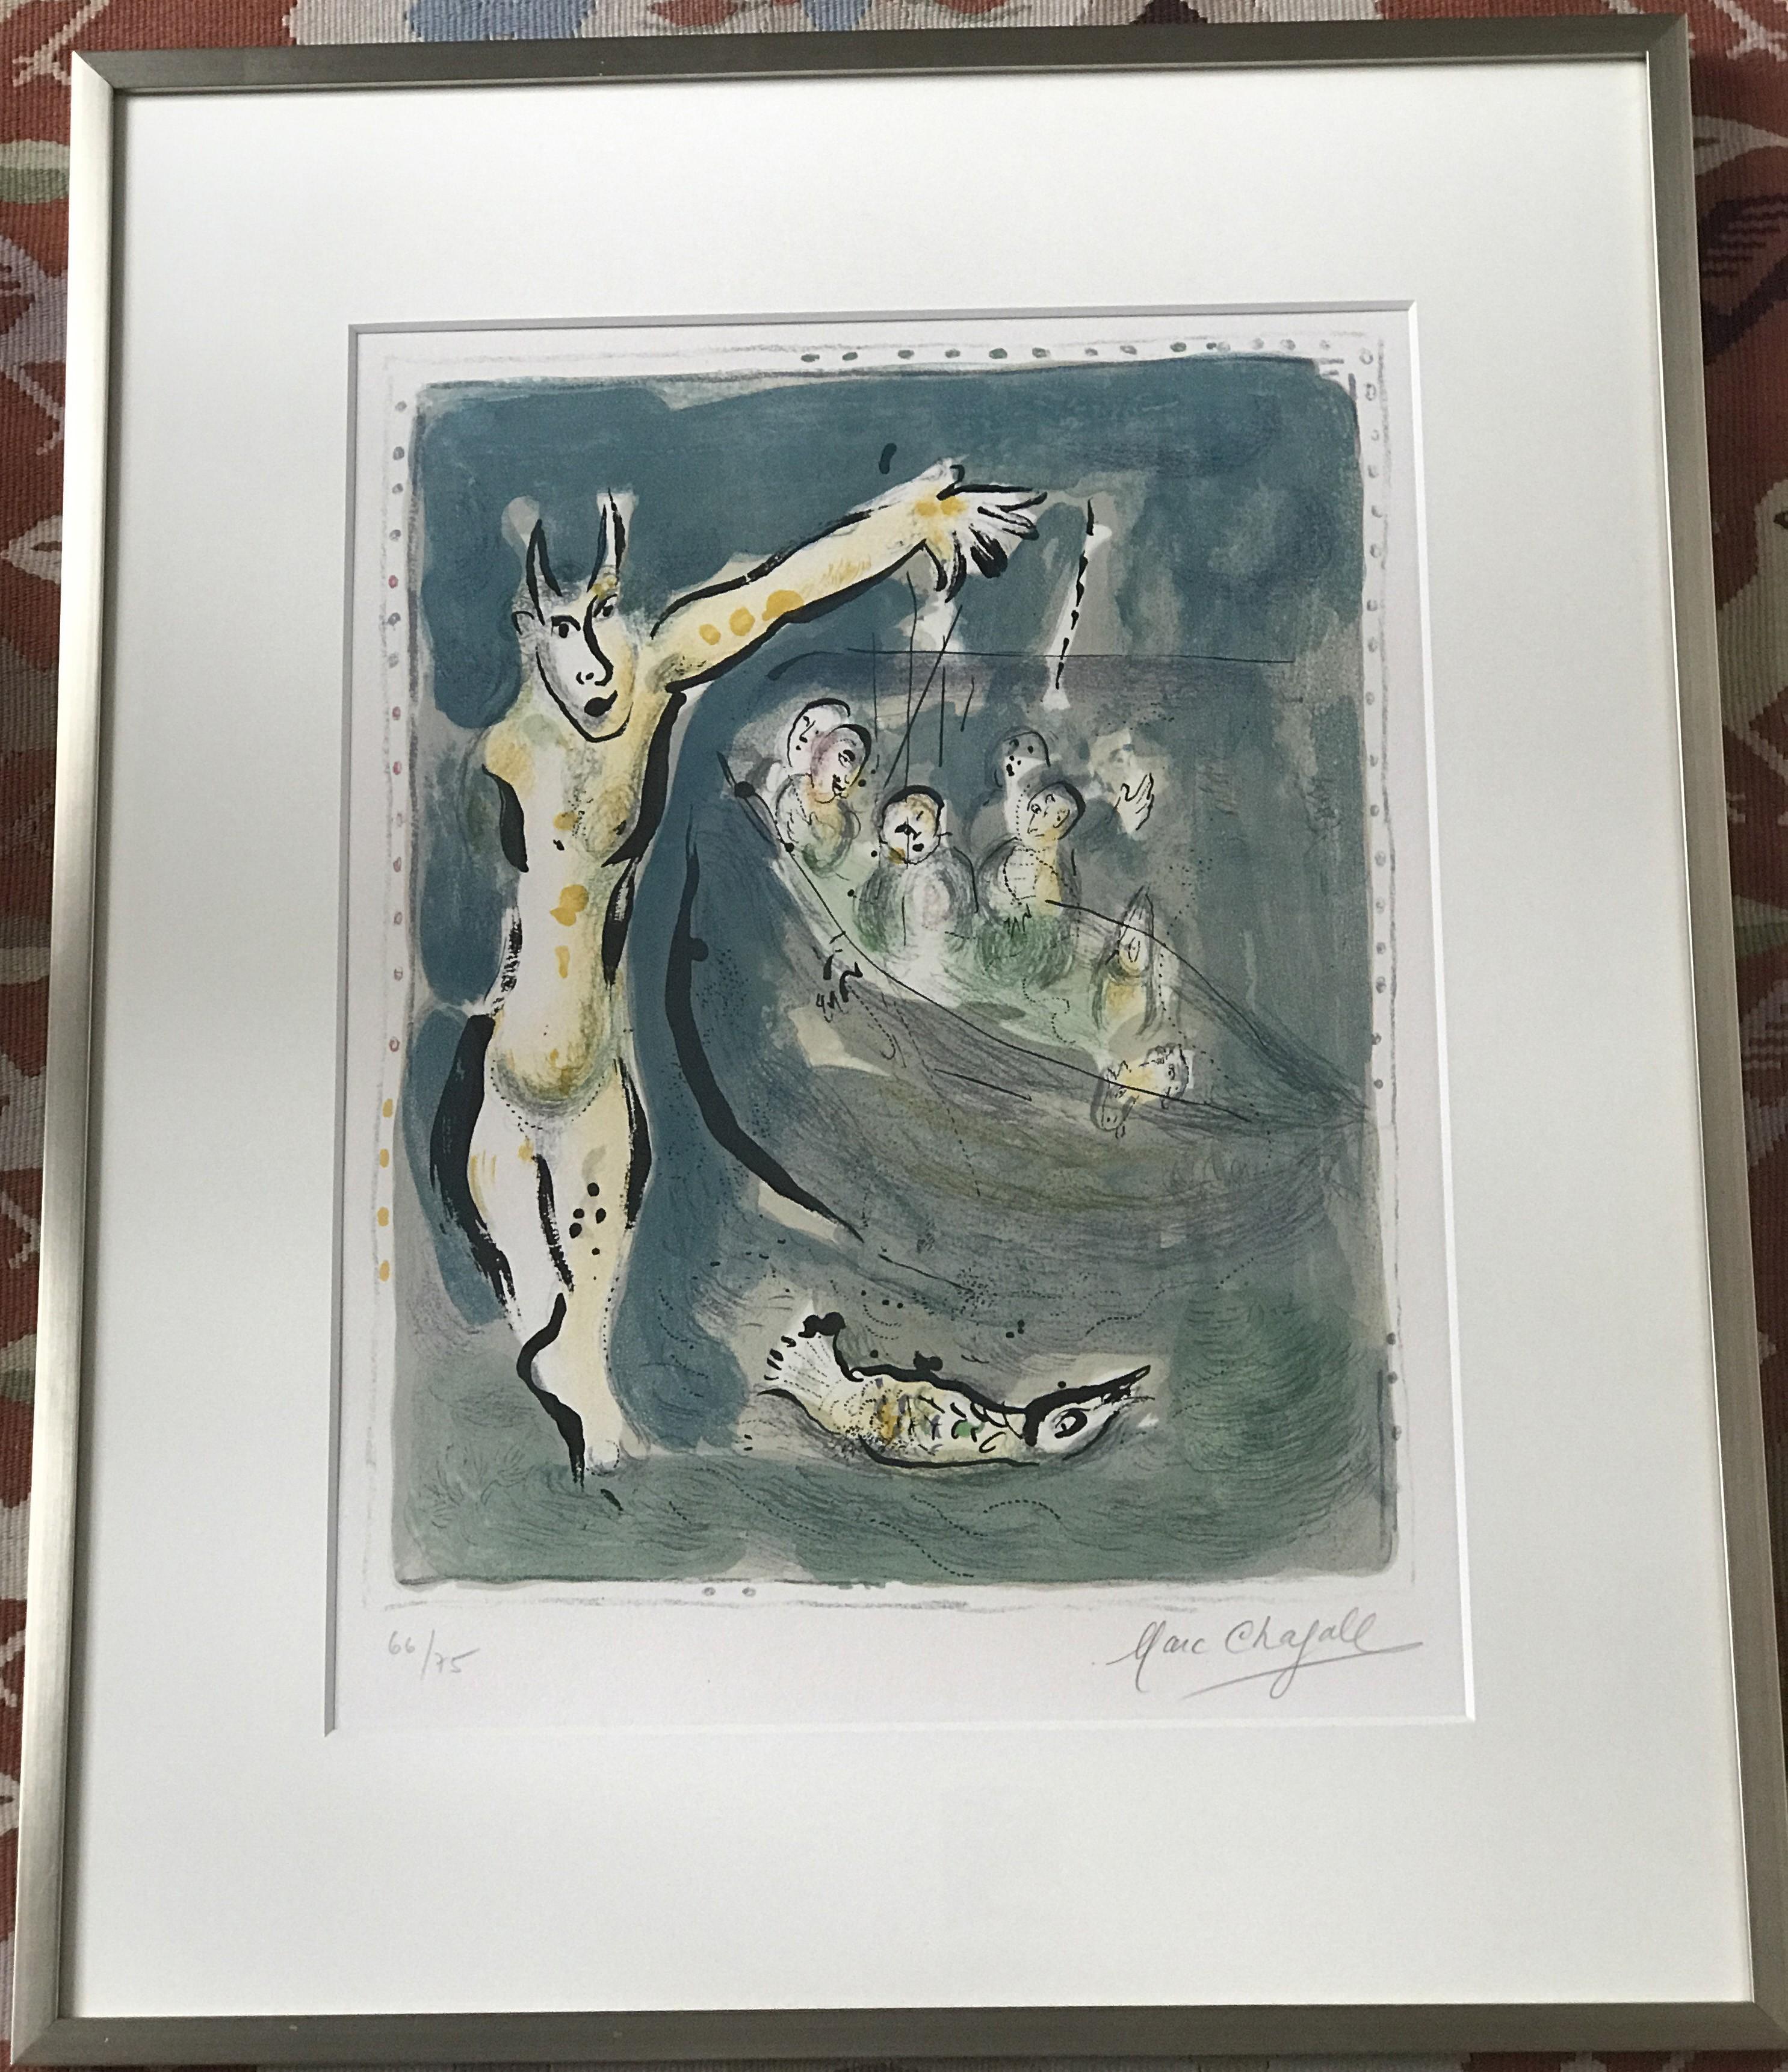 In the Land of the Gods: Aeschylus - Print by Marc Chagall